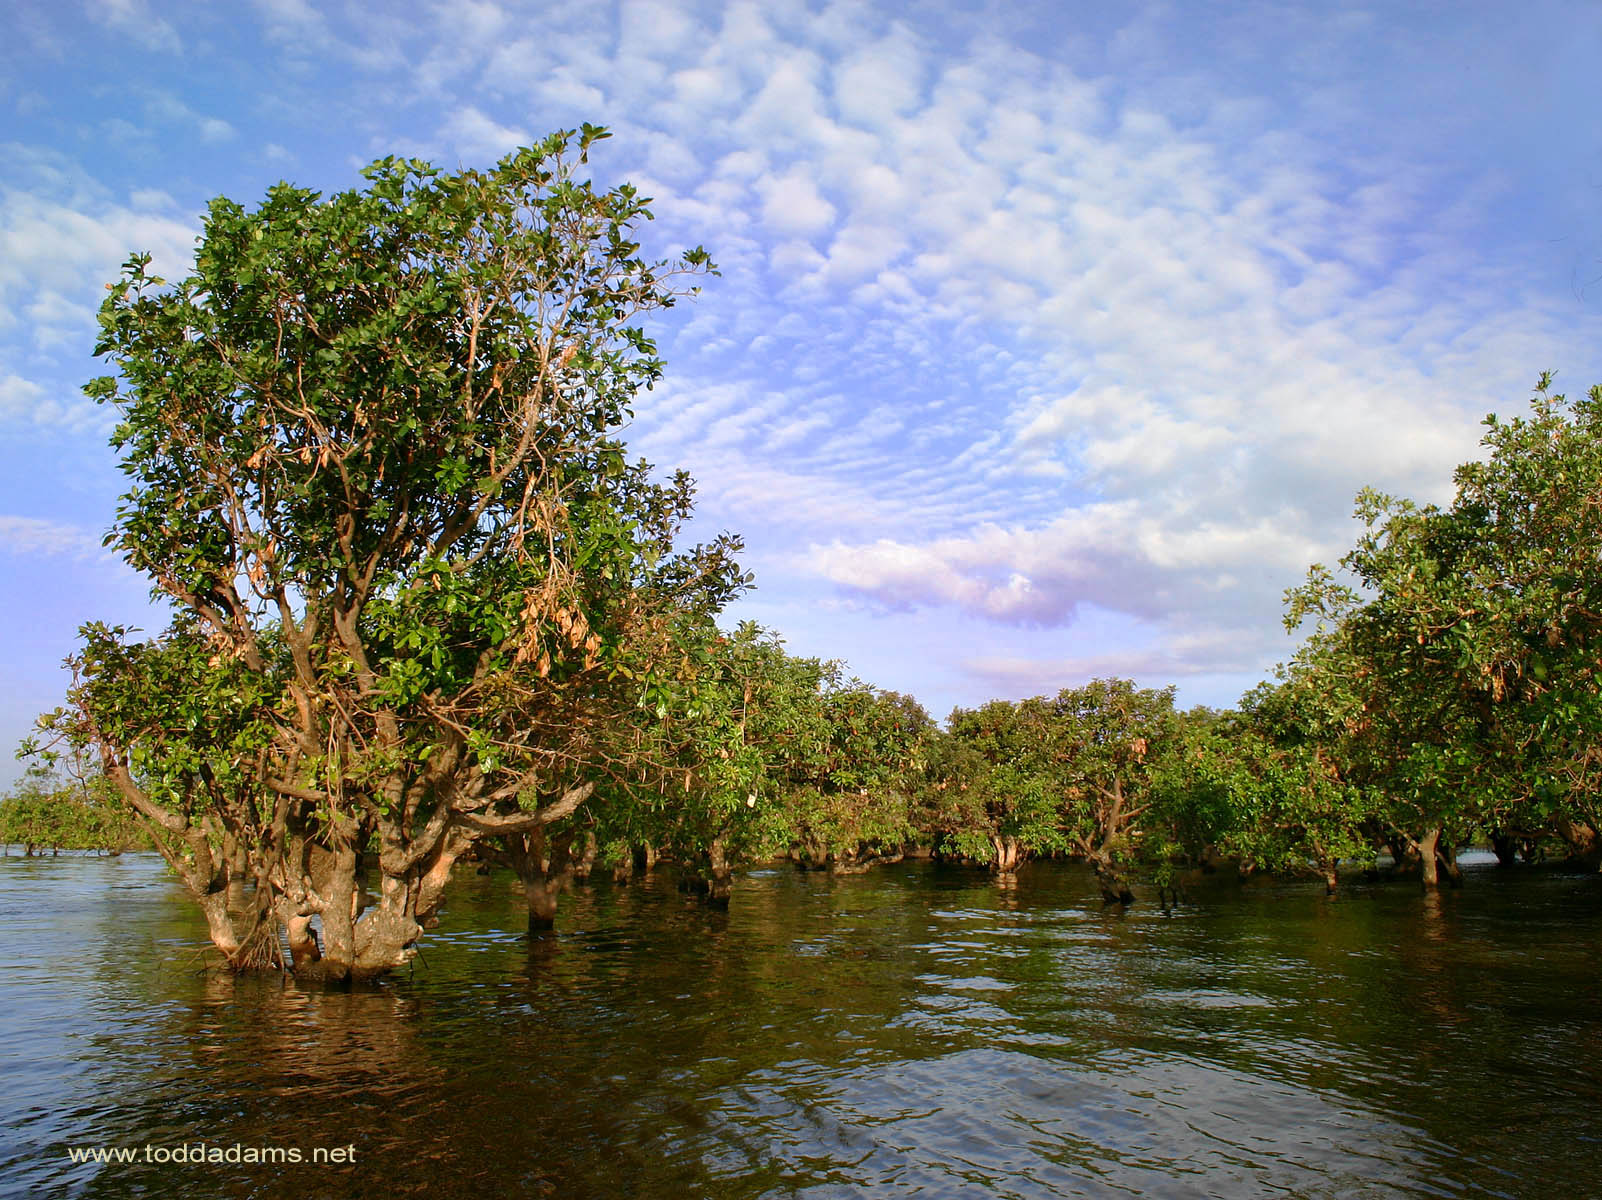 Mangrove Forest In Indonesia - HD Wallpaper 